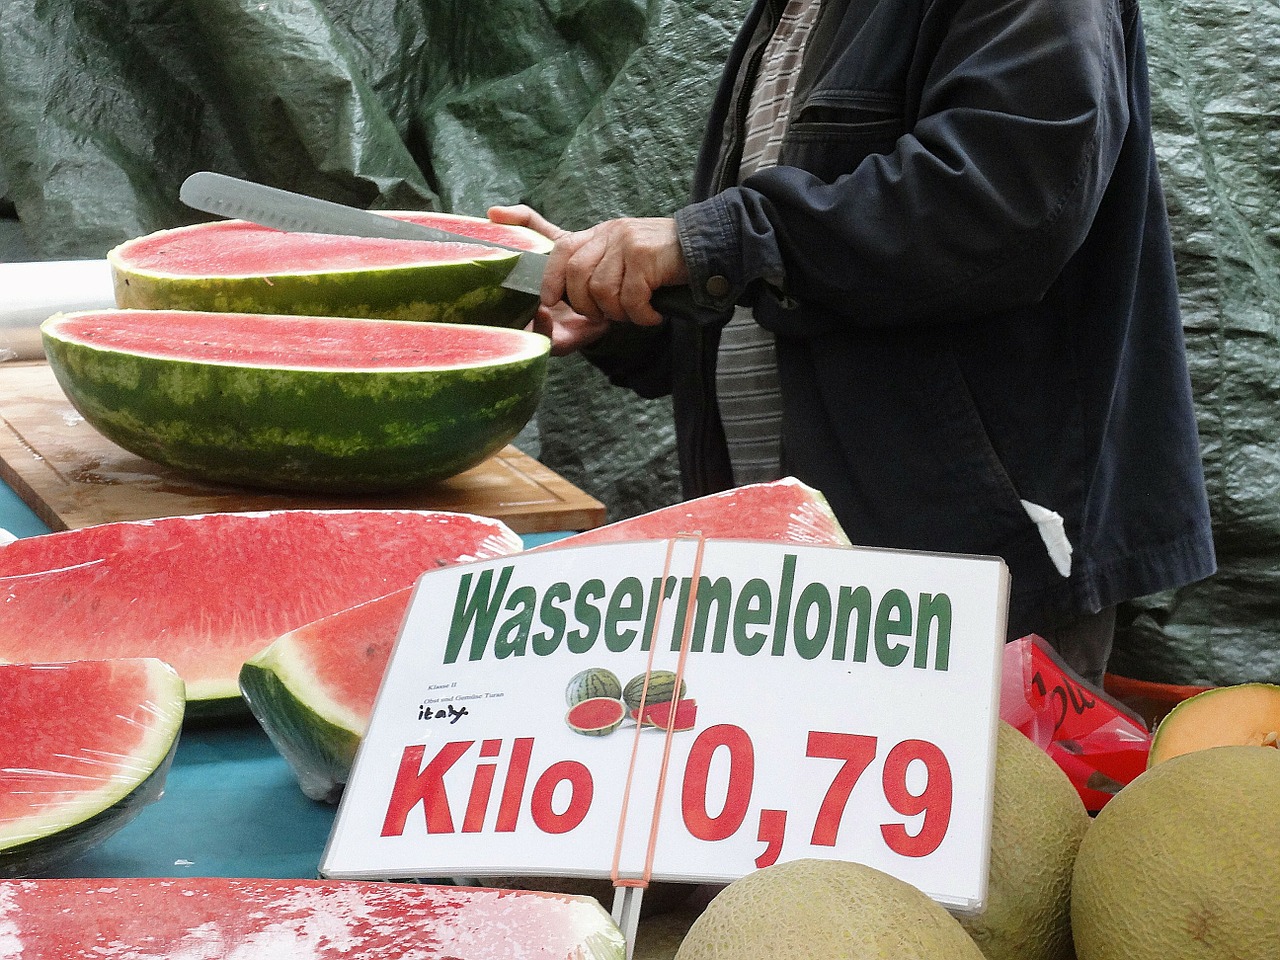 water melons market delicious free photo